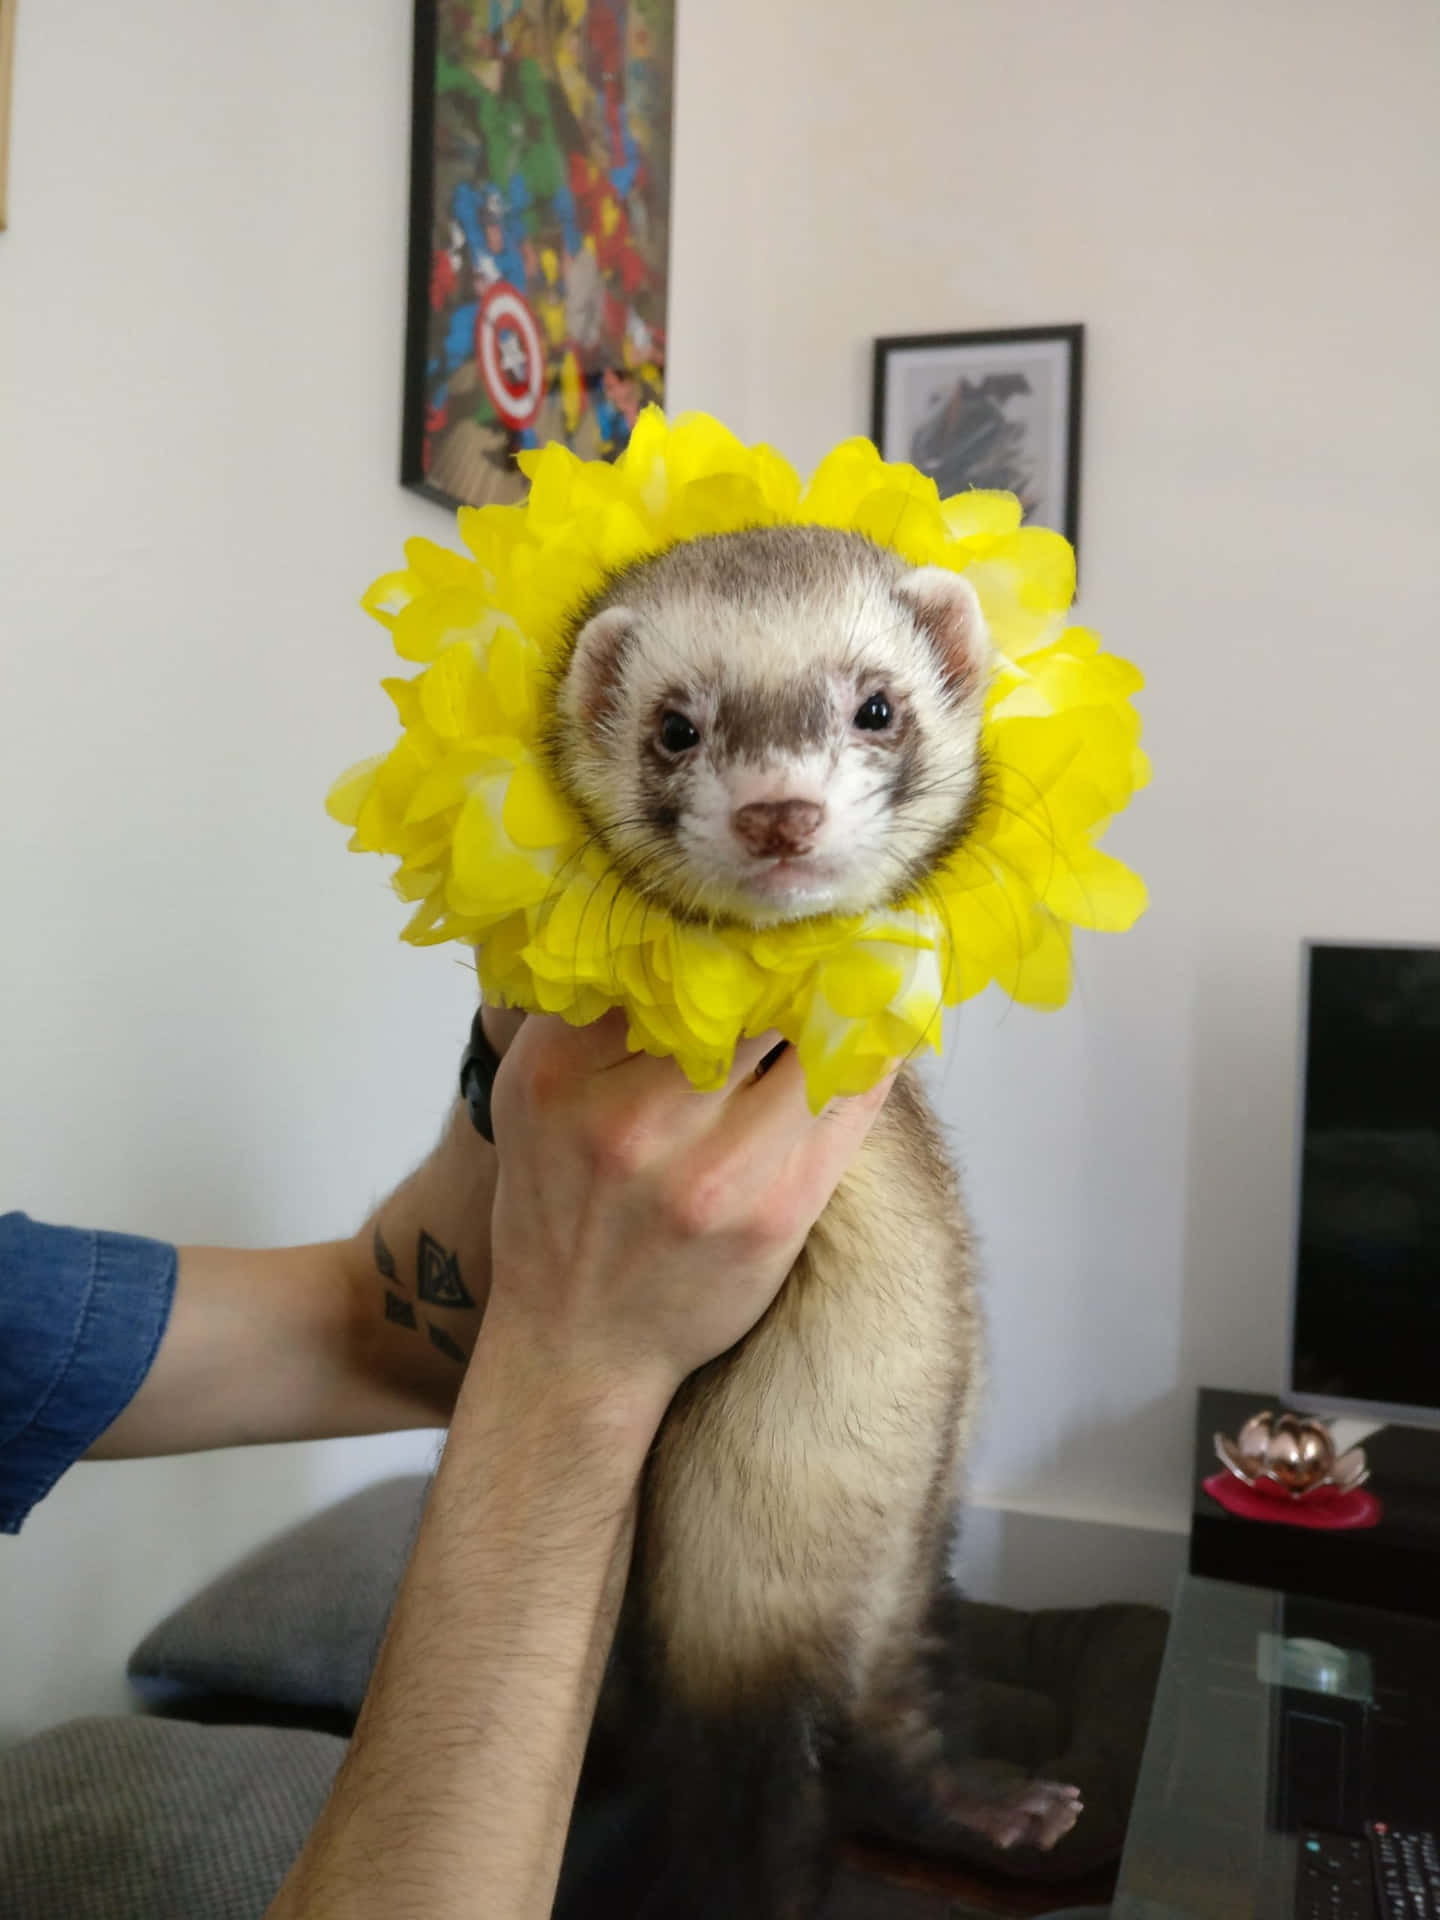 “This cute ferret loves to play!”